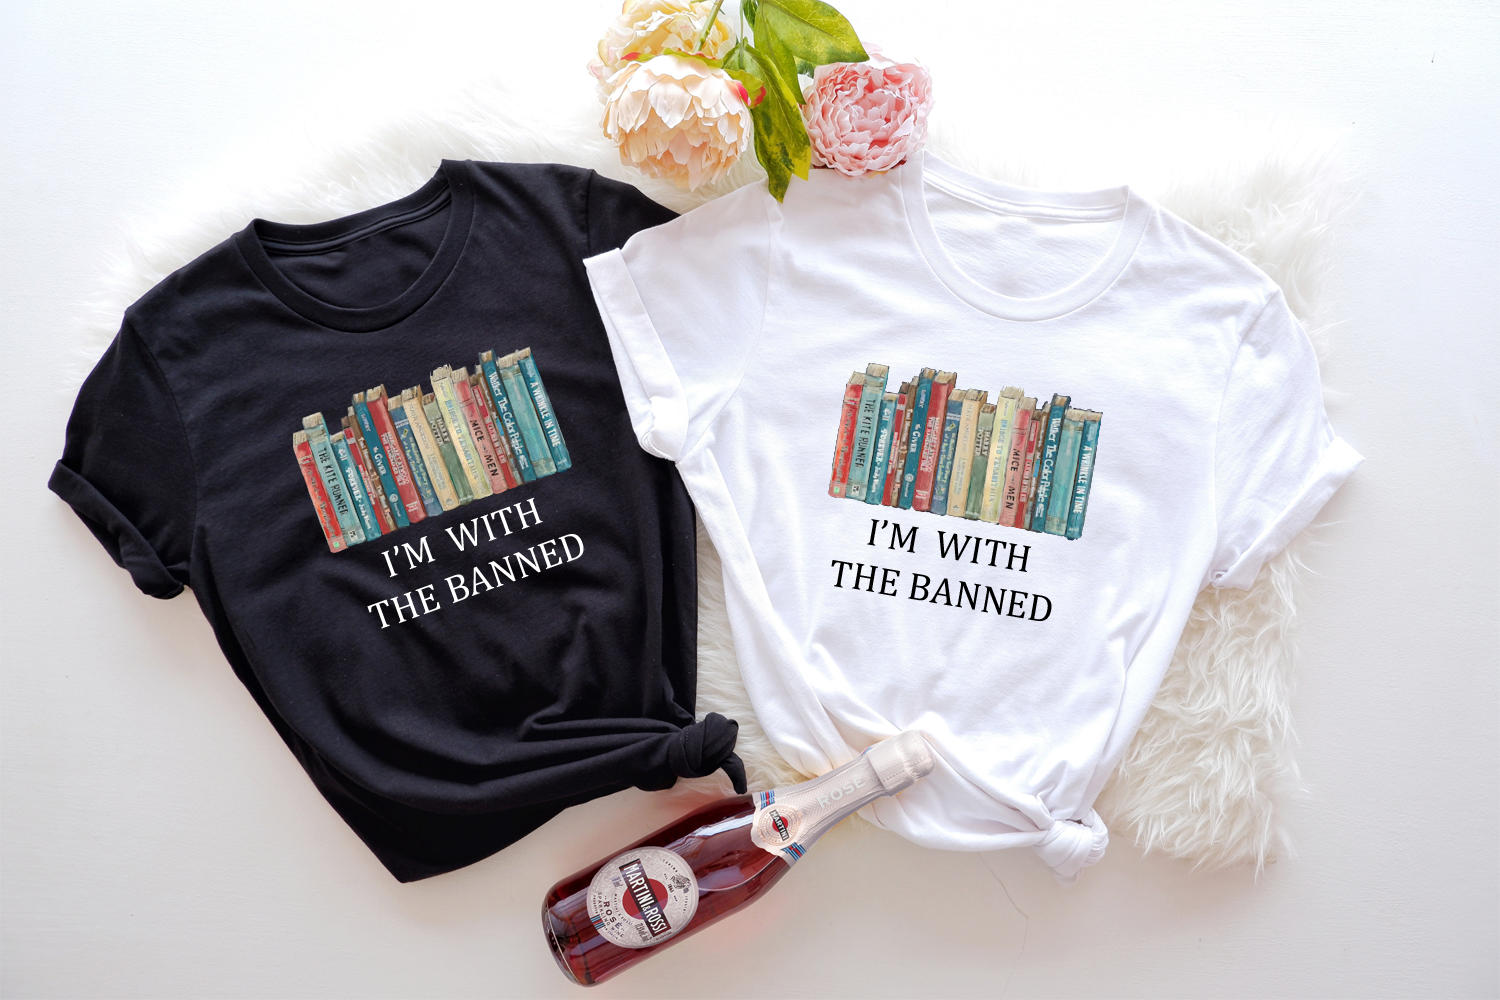 Celebrate the power of literature and defend the right to read with this unique "I'm With The Banned Reading Book" tee.